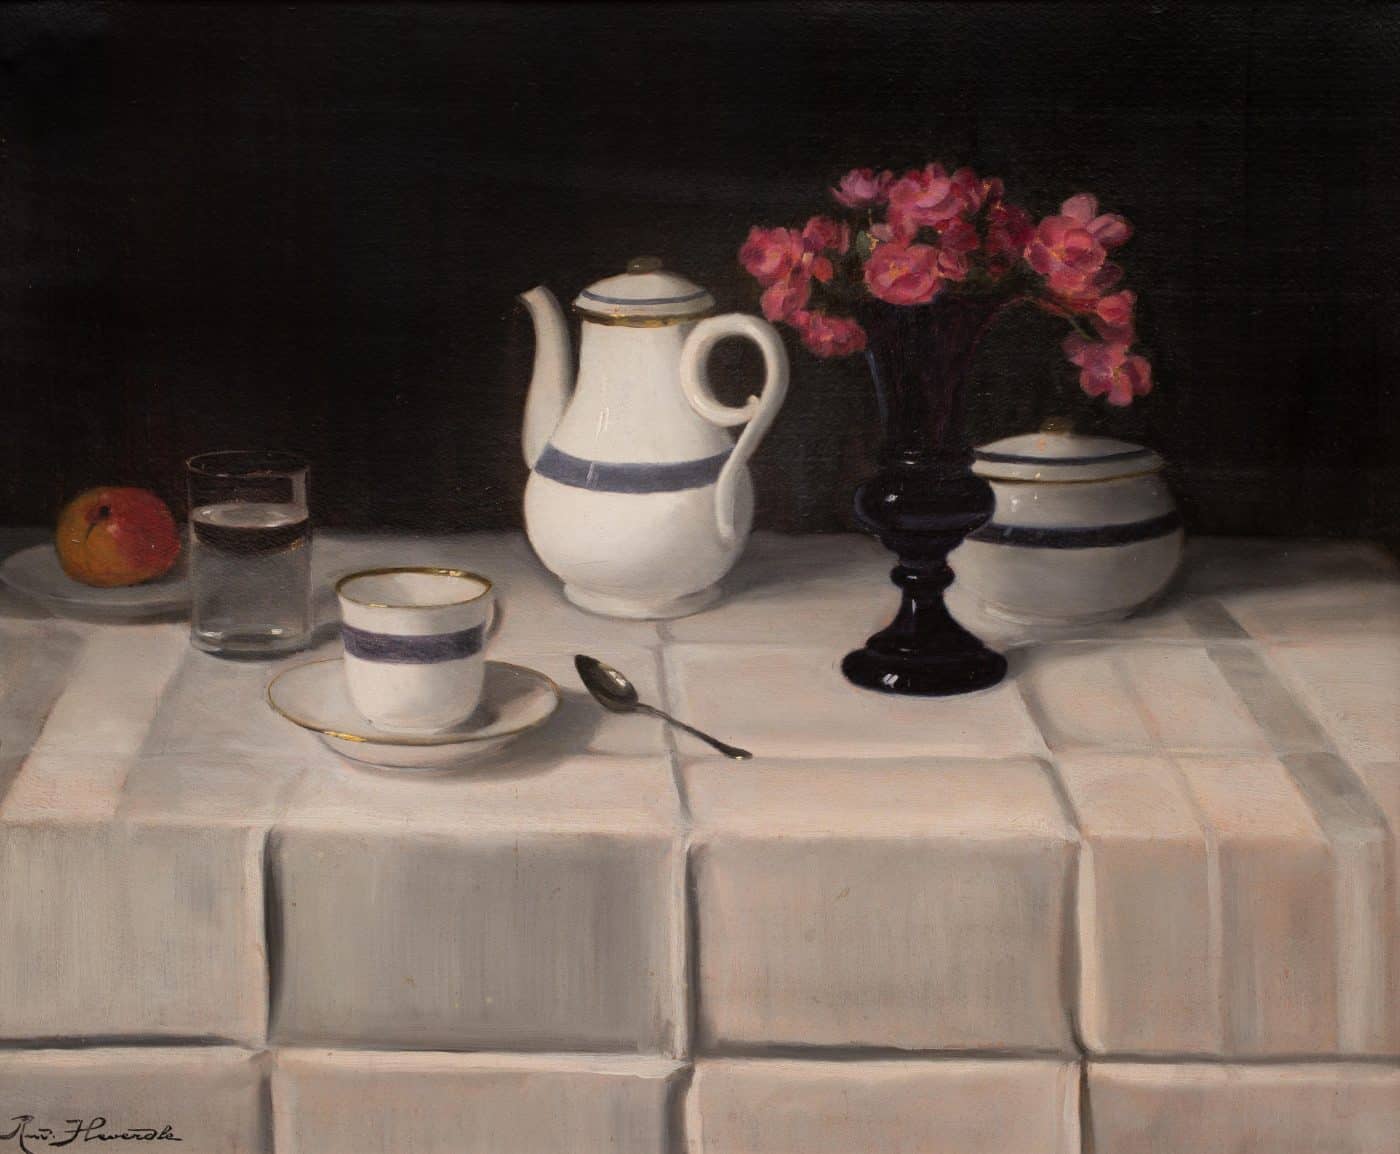 Still life by Hungarian painter Rudolf Heverdle depicting a table with a white table cloth, a gilt-rimmed coffee or tea set and a black vase with pink flowers